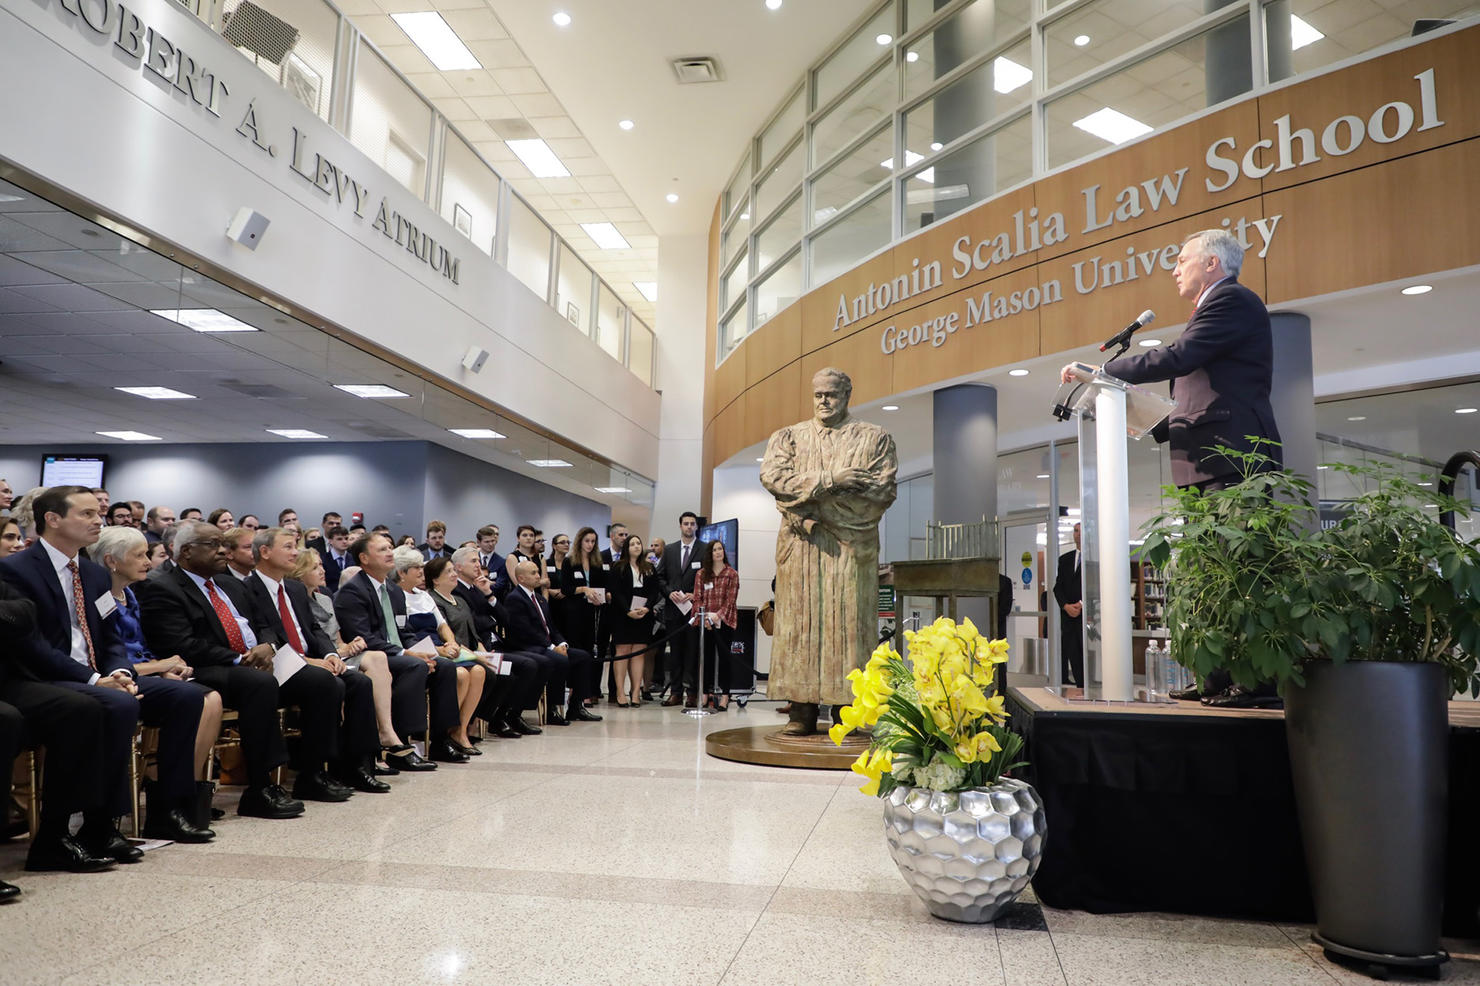 The Scalia statue is unveiled in the center atrium of the law school. To the right, the dean is seen addressing the audience at a podium, and the audience, including five Supreme Court Justices are sitting in rows to the left.